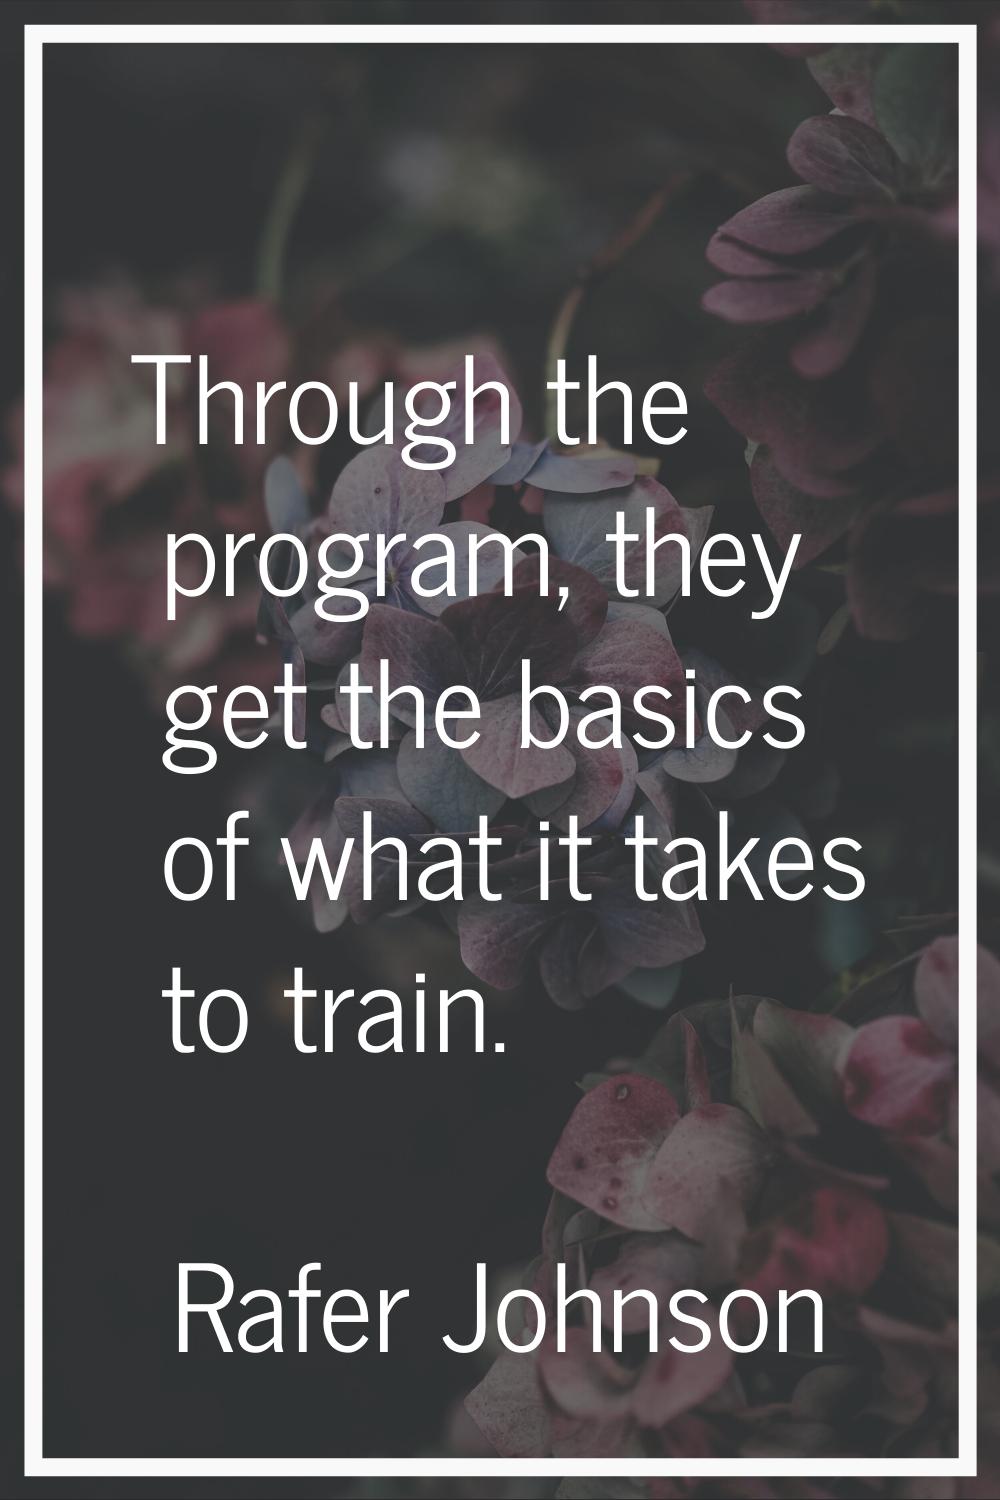 Through the program, they get the basics of what it takes to train.